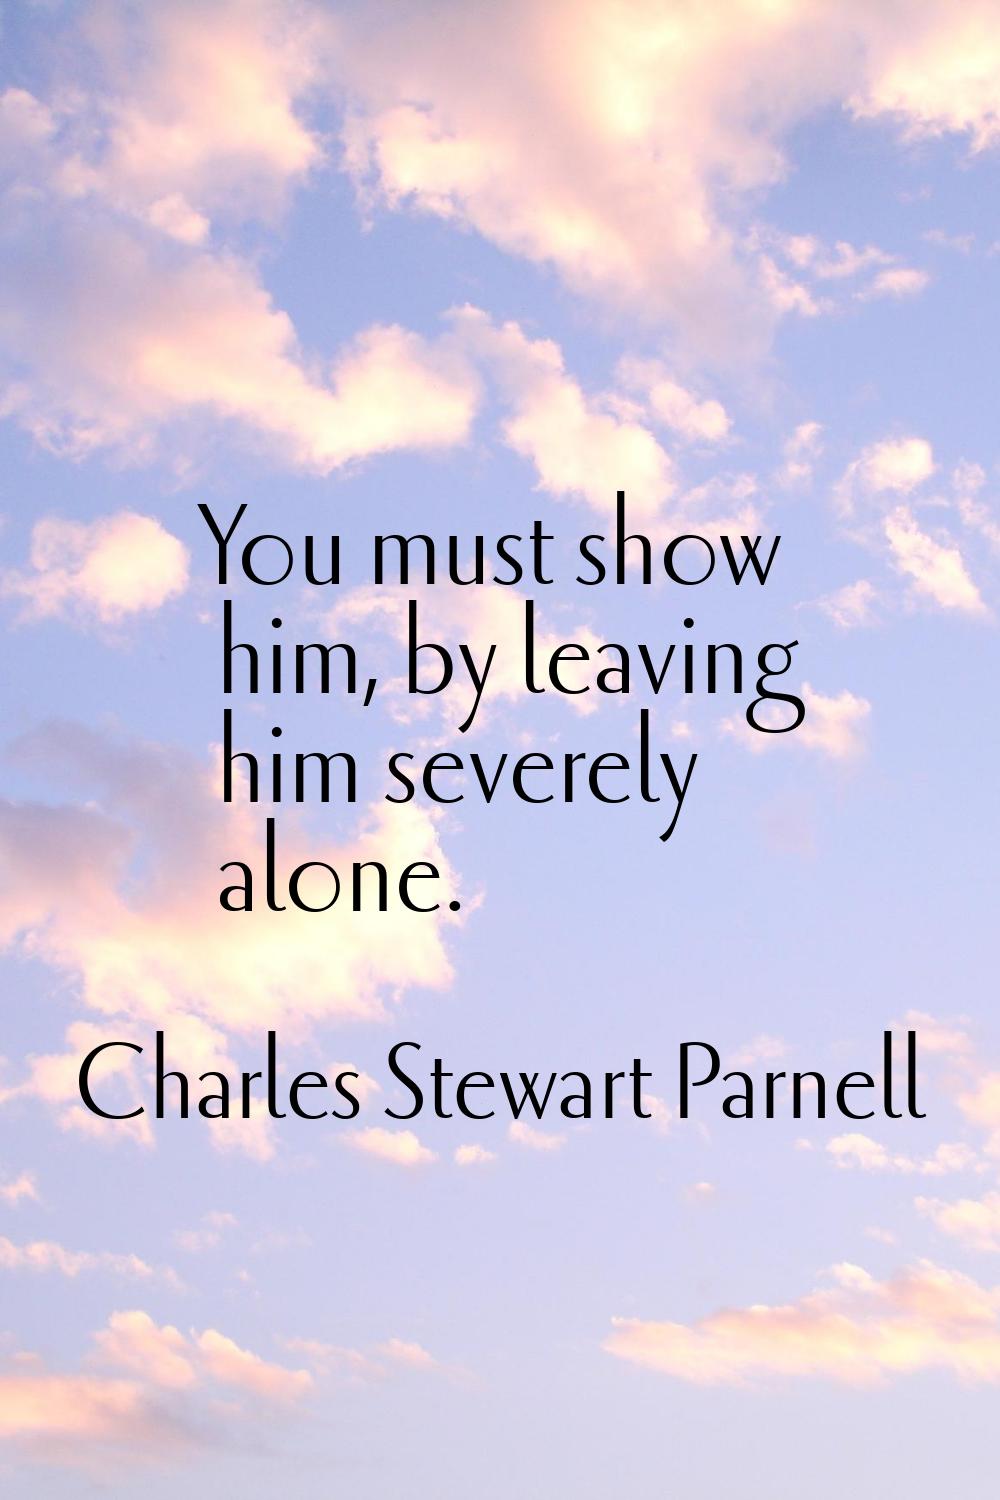 You must show him, by leaving him severely alone.